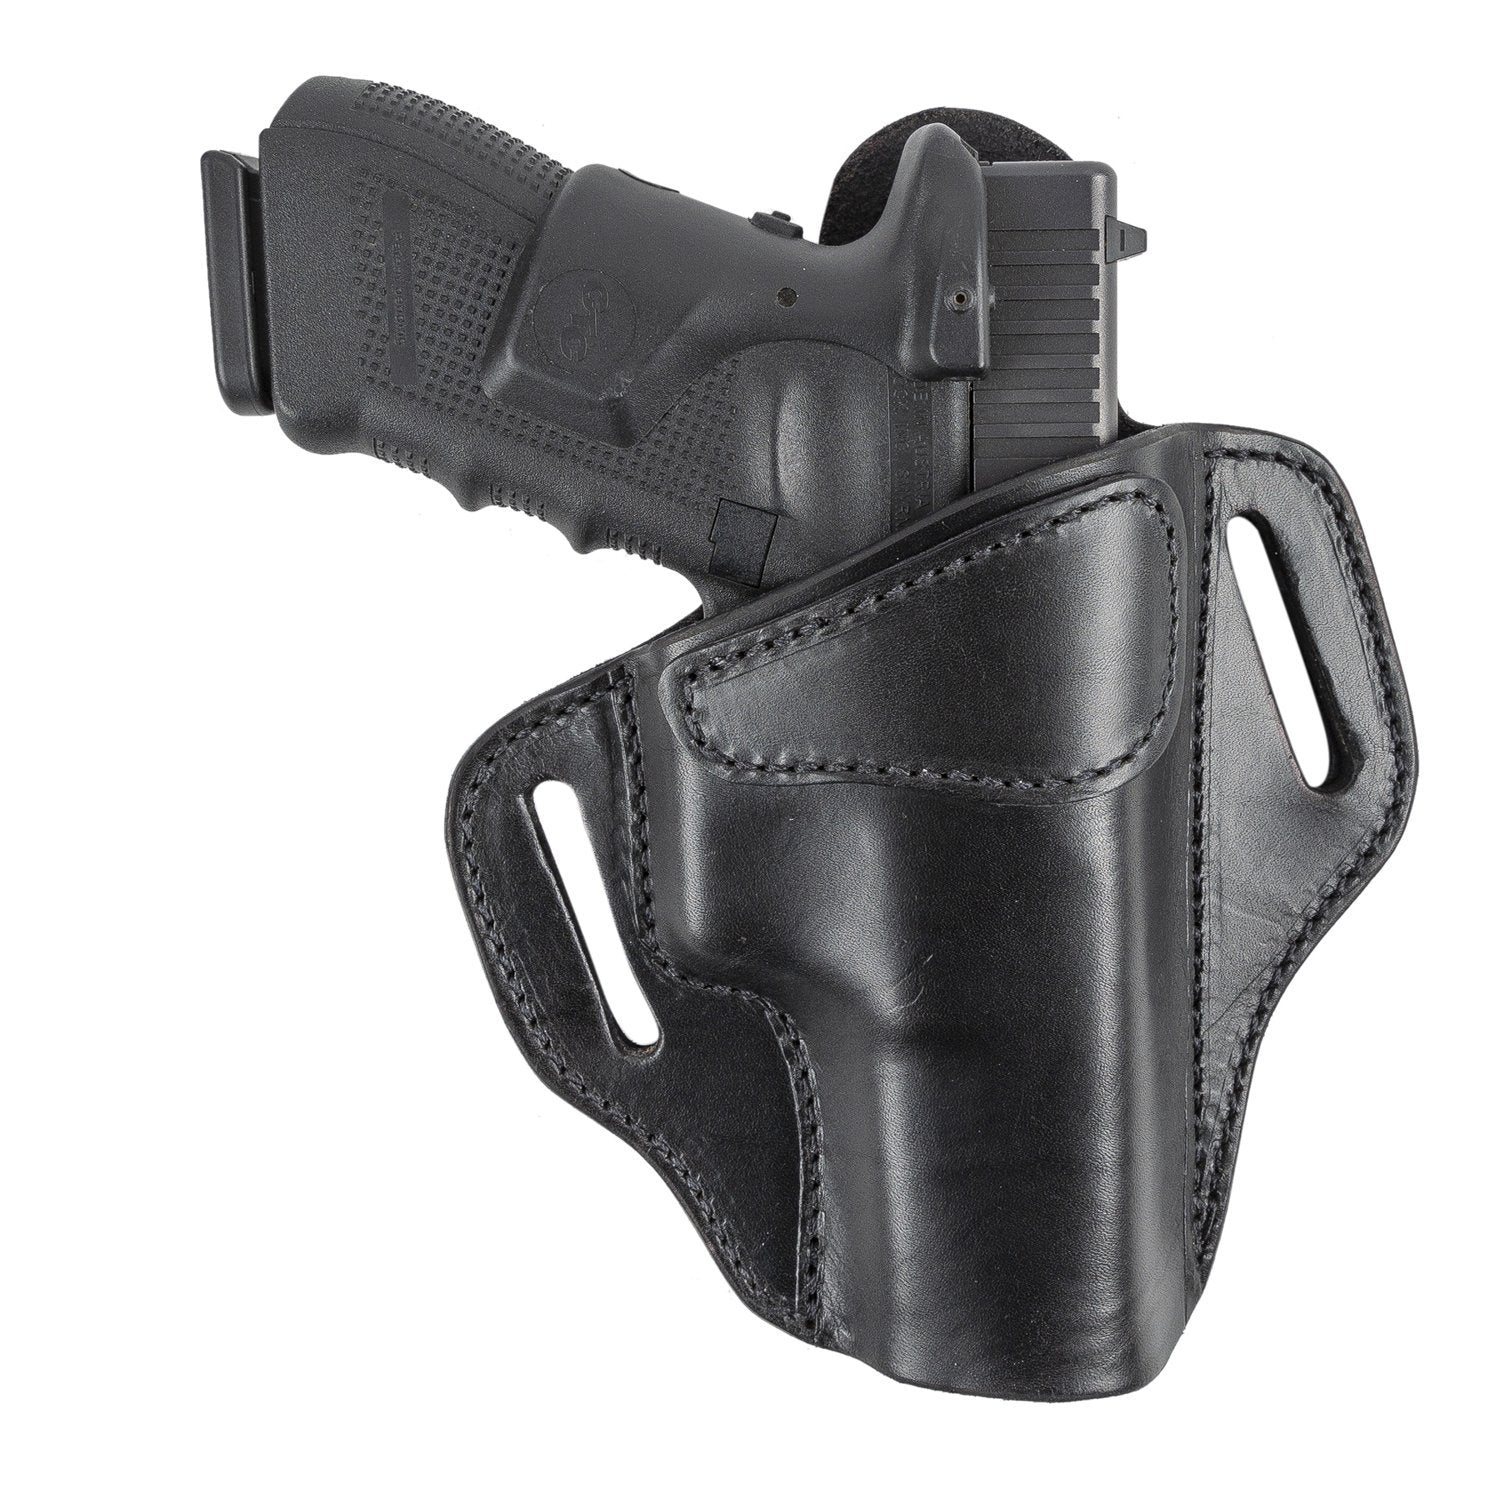 https://relentless-tactical.com/cdn/shop/products/relentless-tactical-relentless-tactical-ultimate-leather-holster-2-slot-owb-made-in-usa-lifetime-warranty-for-glock-17-19-22-26-32-33-s-w-m-p-shield-springfield-xd-xds-plus-all-similar-sized-handguns_1024x1024@2x.jpg?v=1661881638